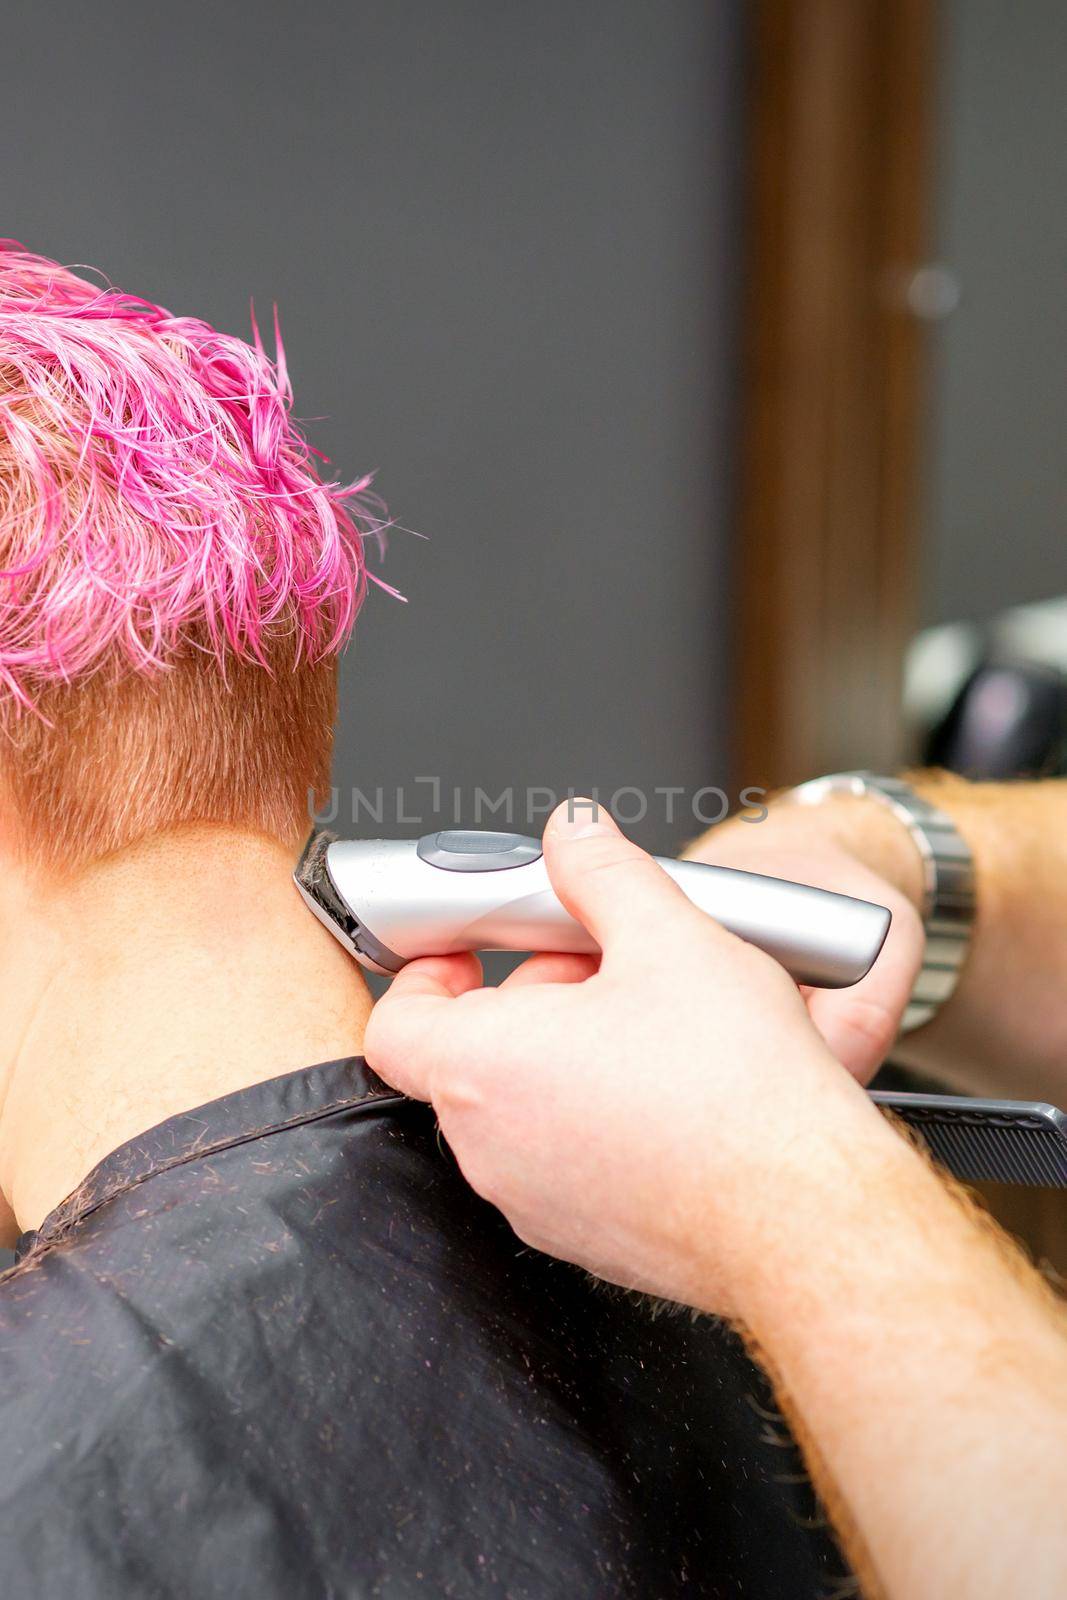 Male hairdresser shaves neck of a young caucasian woman with a short pink hairstyle by electric shaver in a hairdresser salon, close up